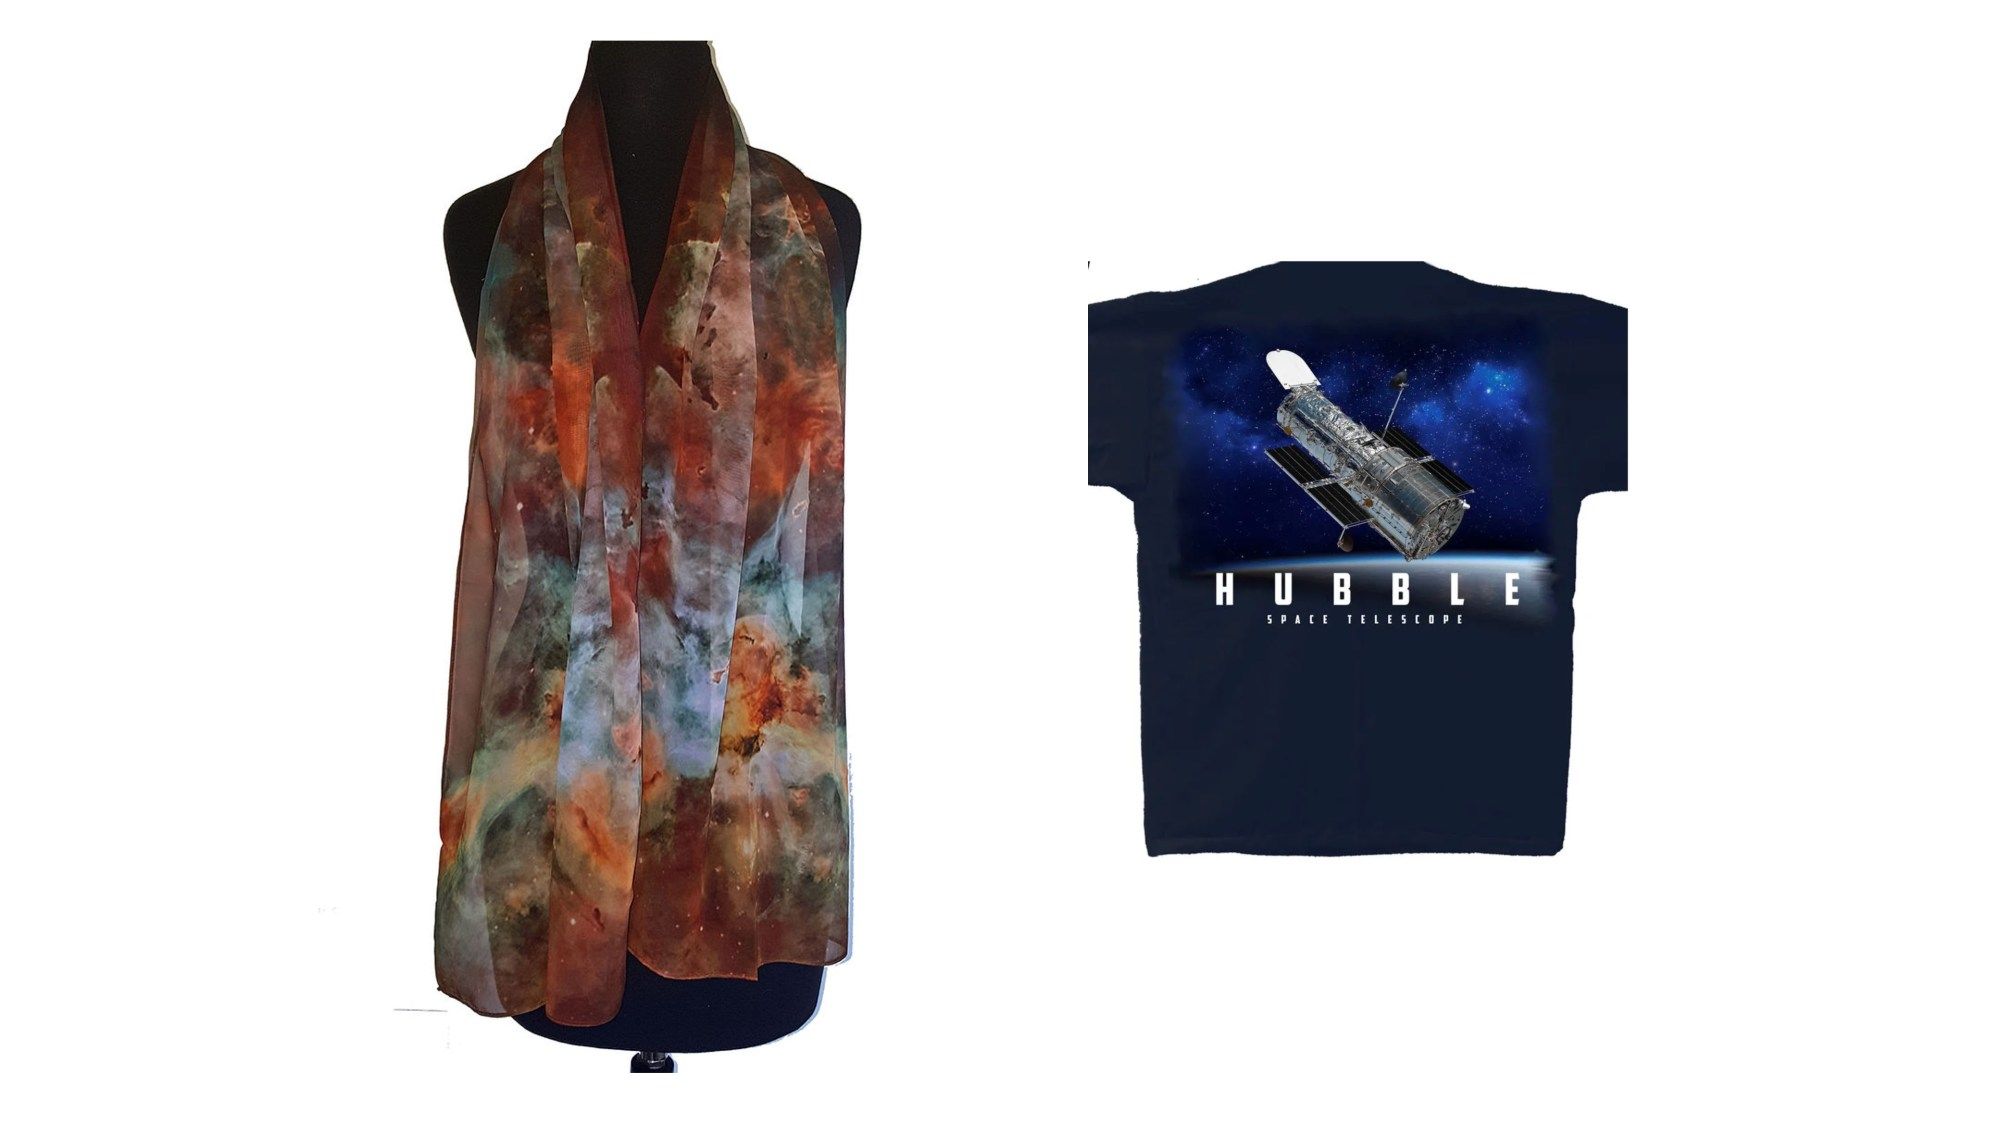 A woman's scarf based on a Hubble nebula image and a t-shirt with the spacecraft on it.